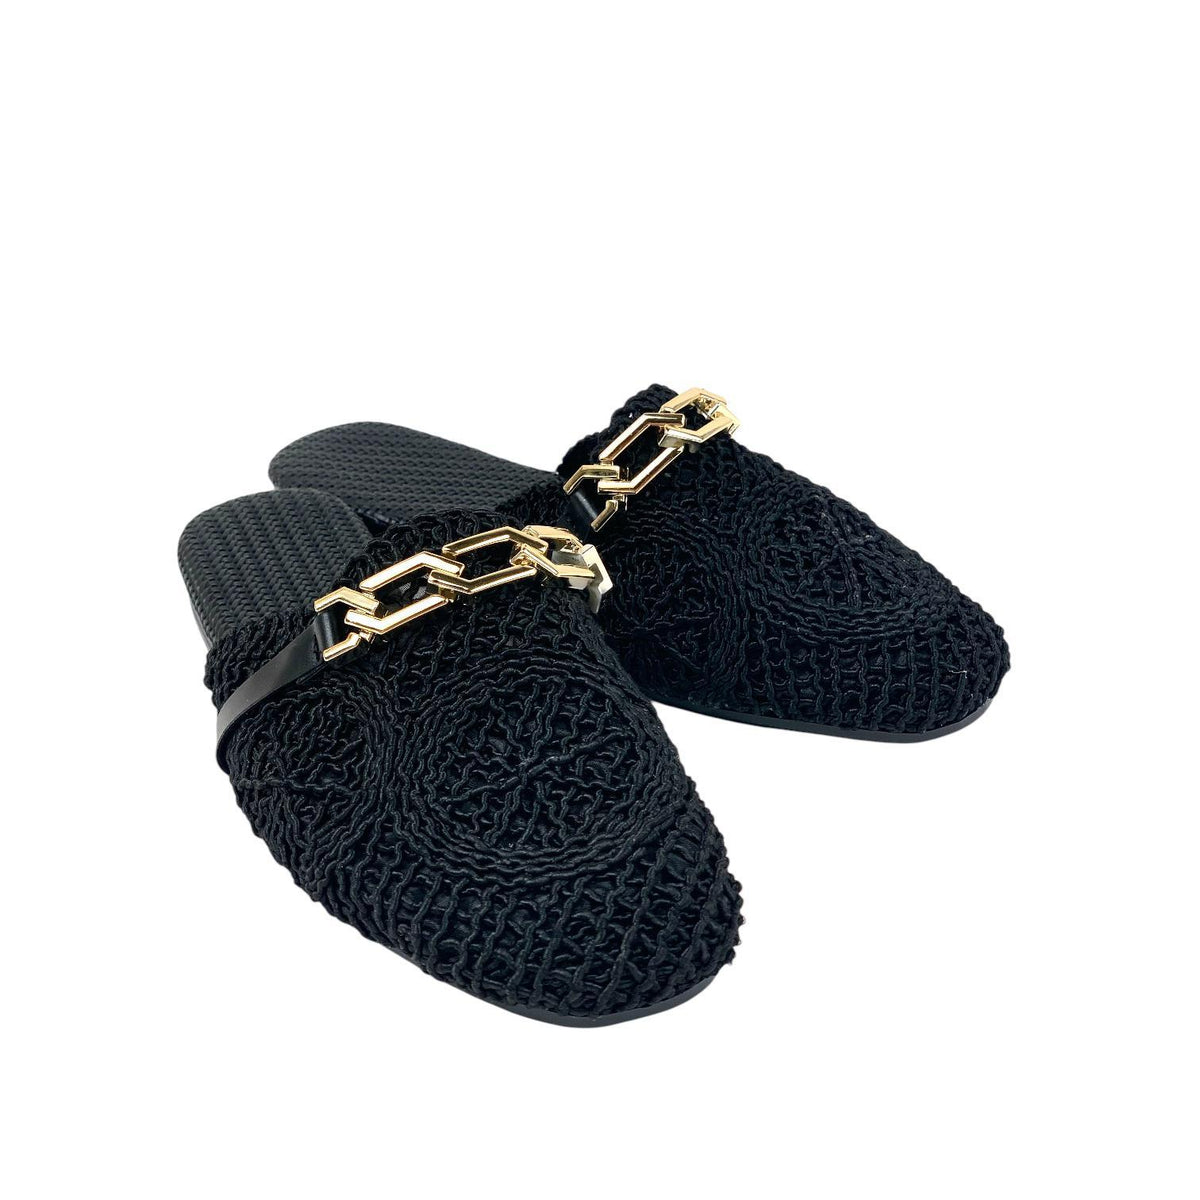 Women's Therm Black Stone Detailed Knitwear Slippers 1cm